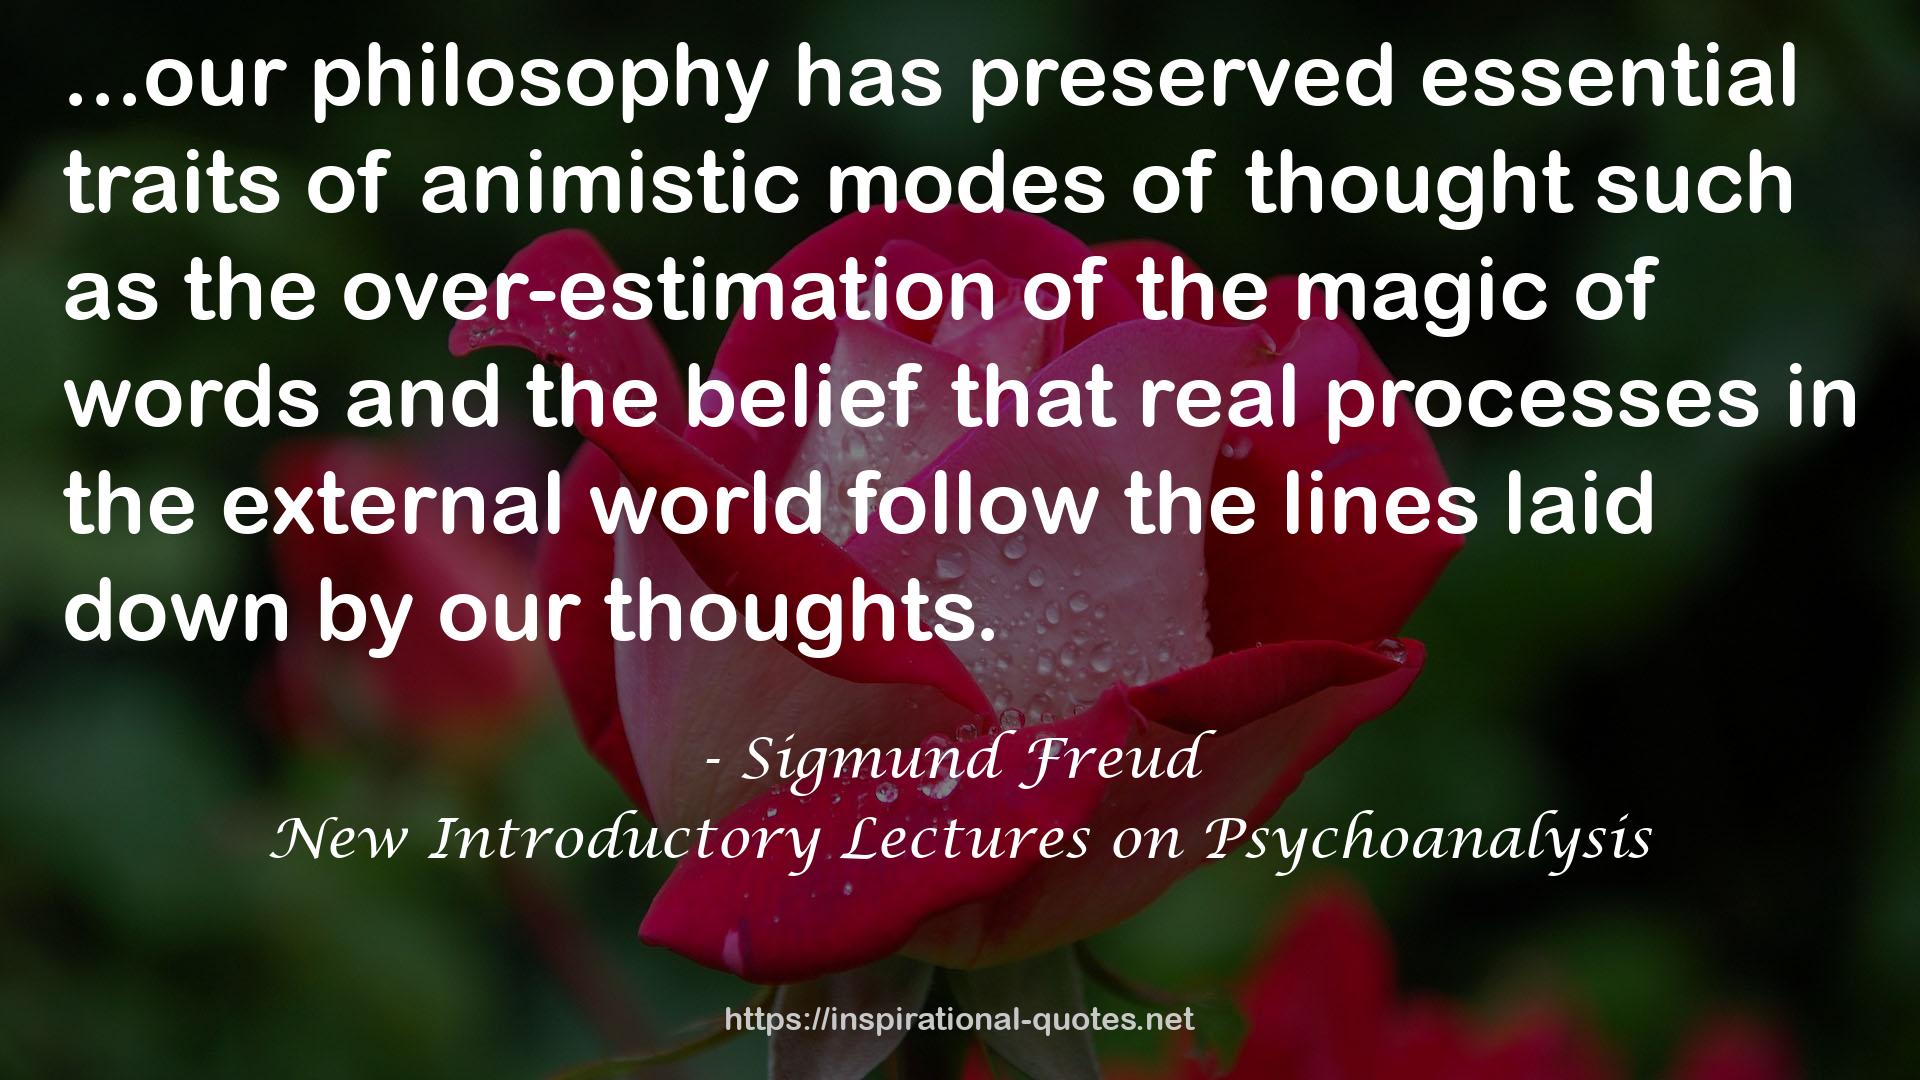 New Introductory Lectures on Psychoanalysis QUOTES